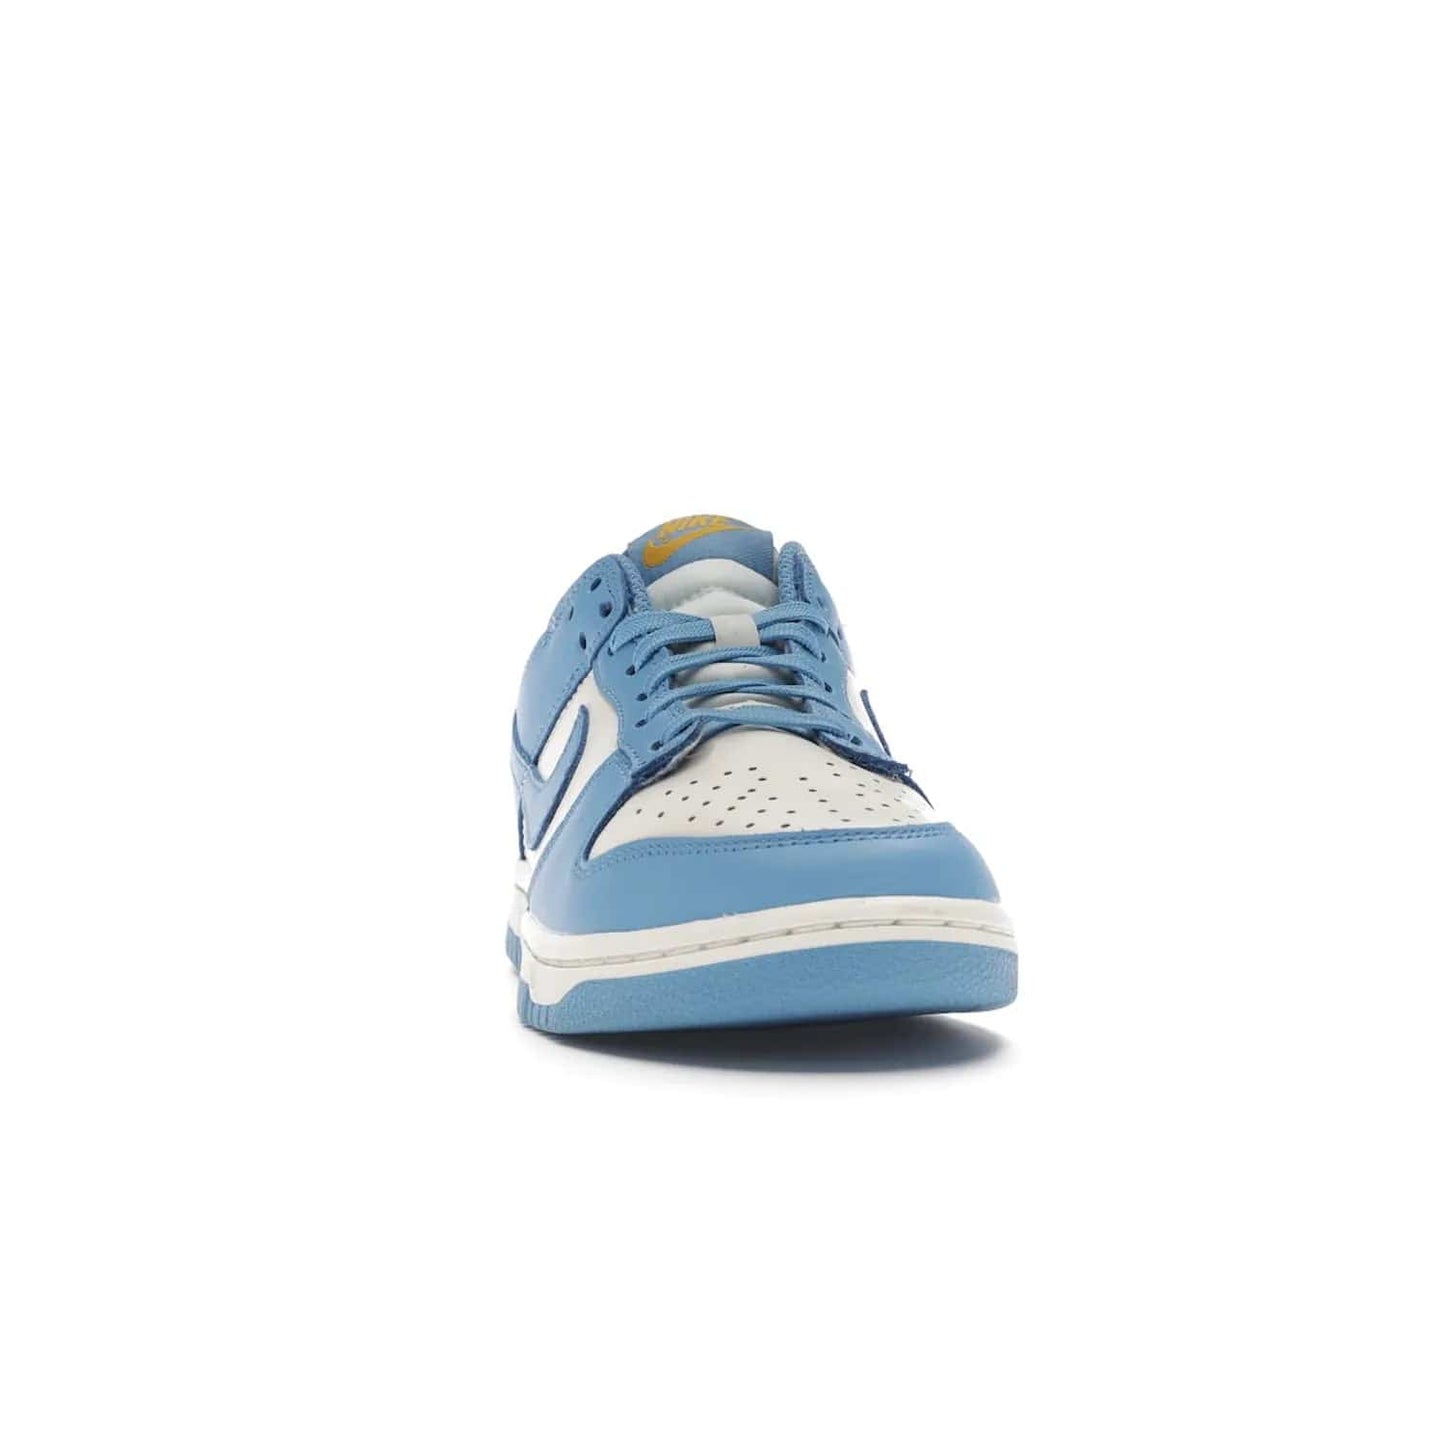 Nike Dunk Low Coast (Women's) - Image 9 - Only at www.BallersClubKickz.com - Iconic UCLA colors honor the west coast with the Nike Dunk Low Coast (Women's), a bold combo of light blue, white and yellow. Light leather upper with white midsole and light EVA outsole offer a modern twist. Released Feb 2021 for $100.